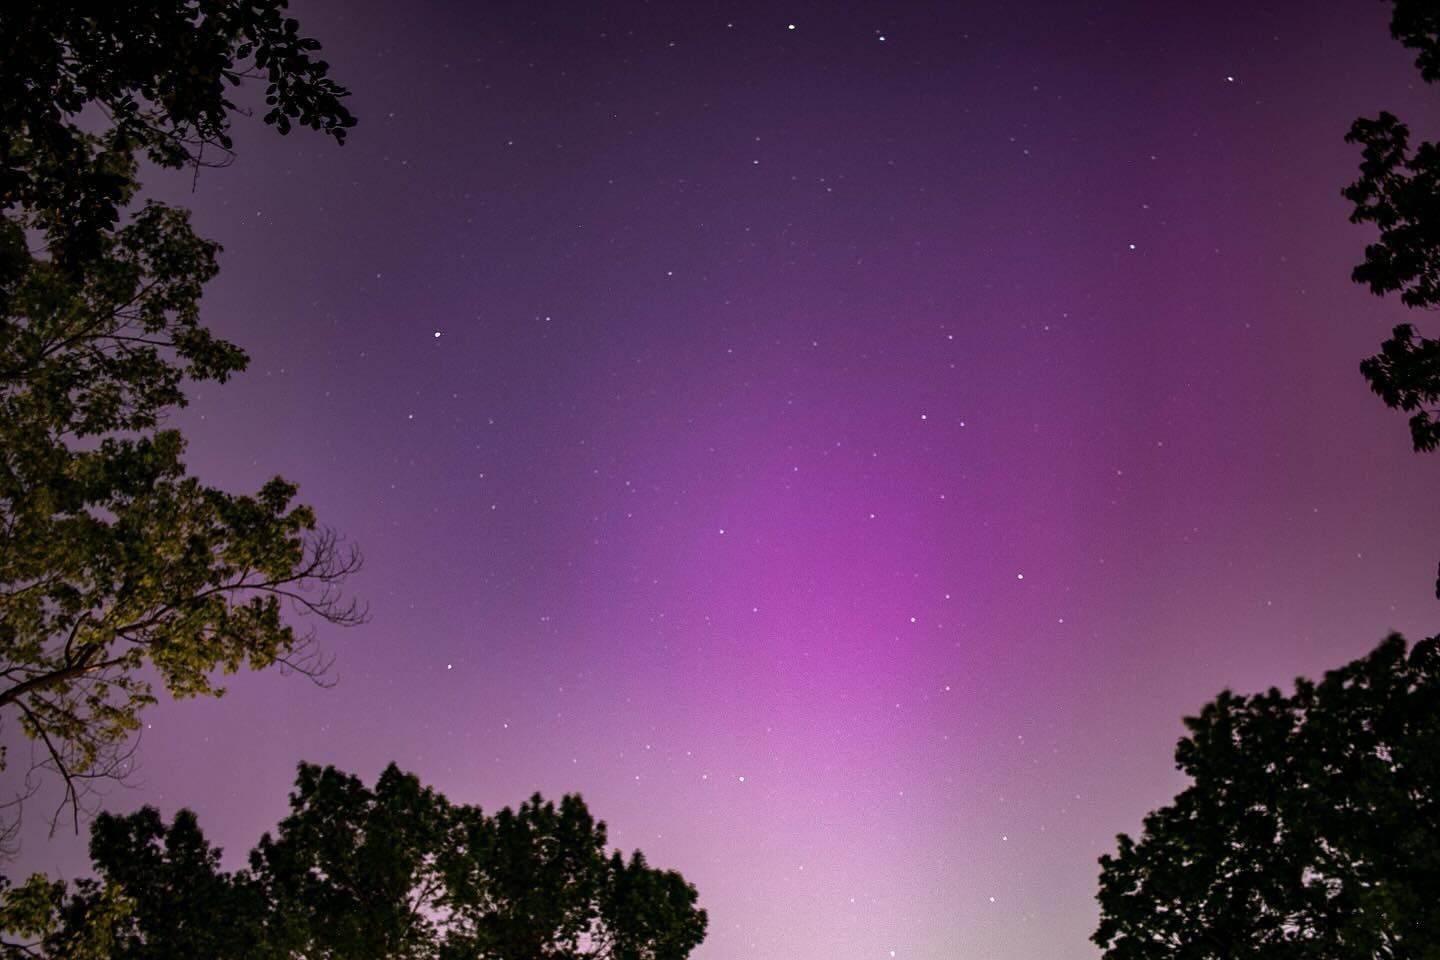 Would be infinitely cooler if I wasn&rsquo;t just in my backyard dealing with light pollution, but I&rsquo;ll take Aurora any way I can get her!